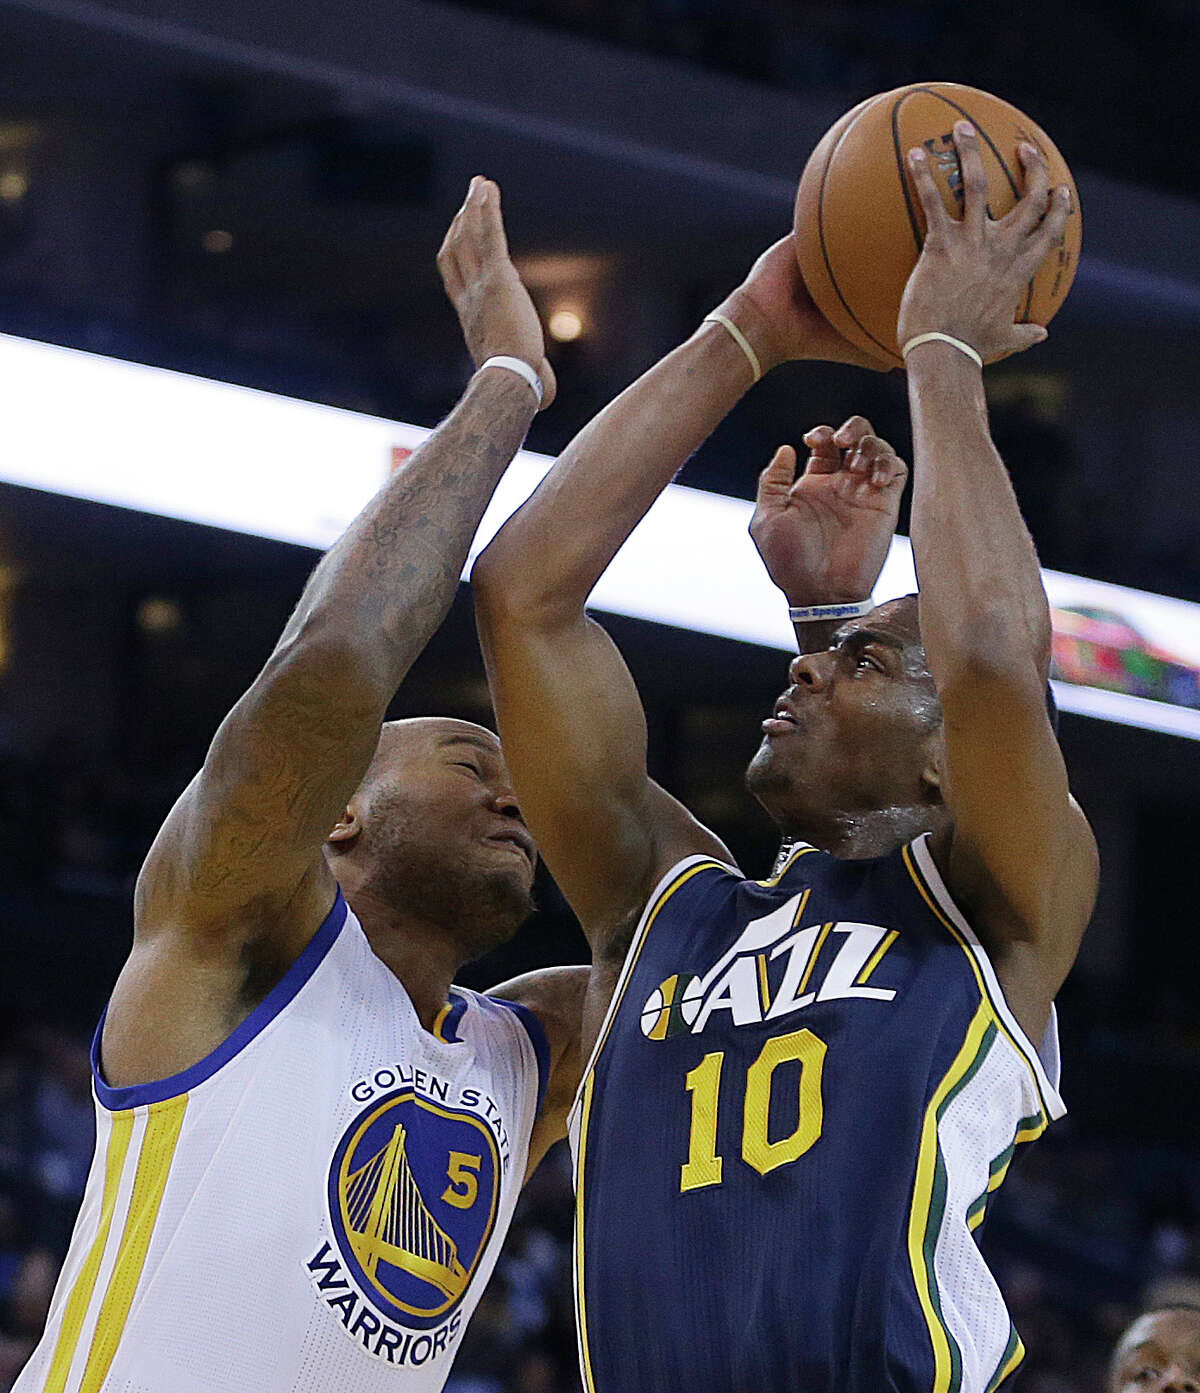 Utah Jazz guard Alec Burks, right, shoots against Golden State Warriors' Marreese Speights during the first half of an NBA basketball game Friday, Nov. 21, 2014, in Oakland, Calif. (AP Photo/Ben Margot)